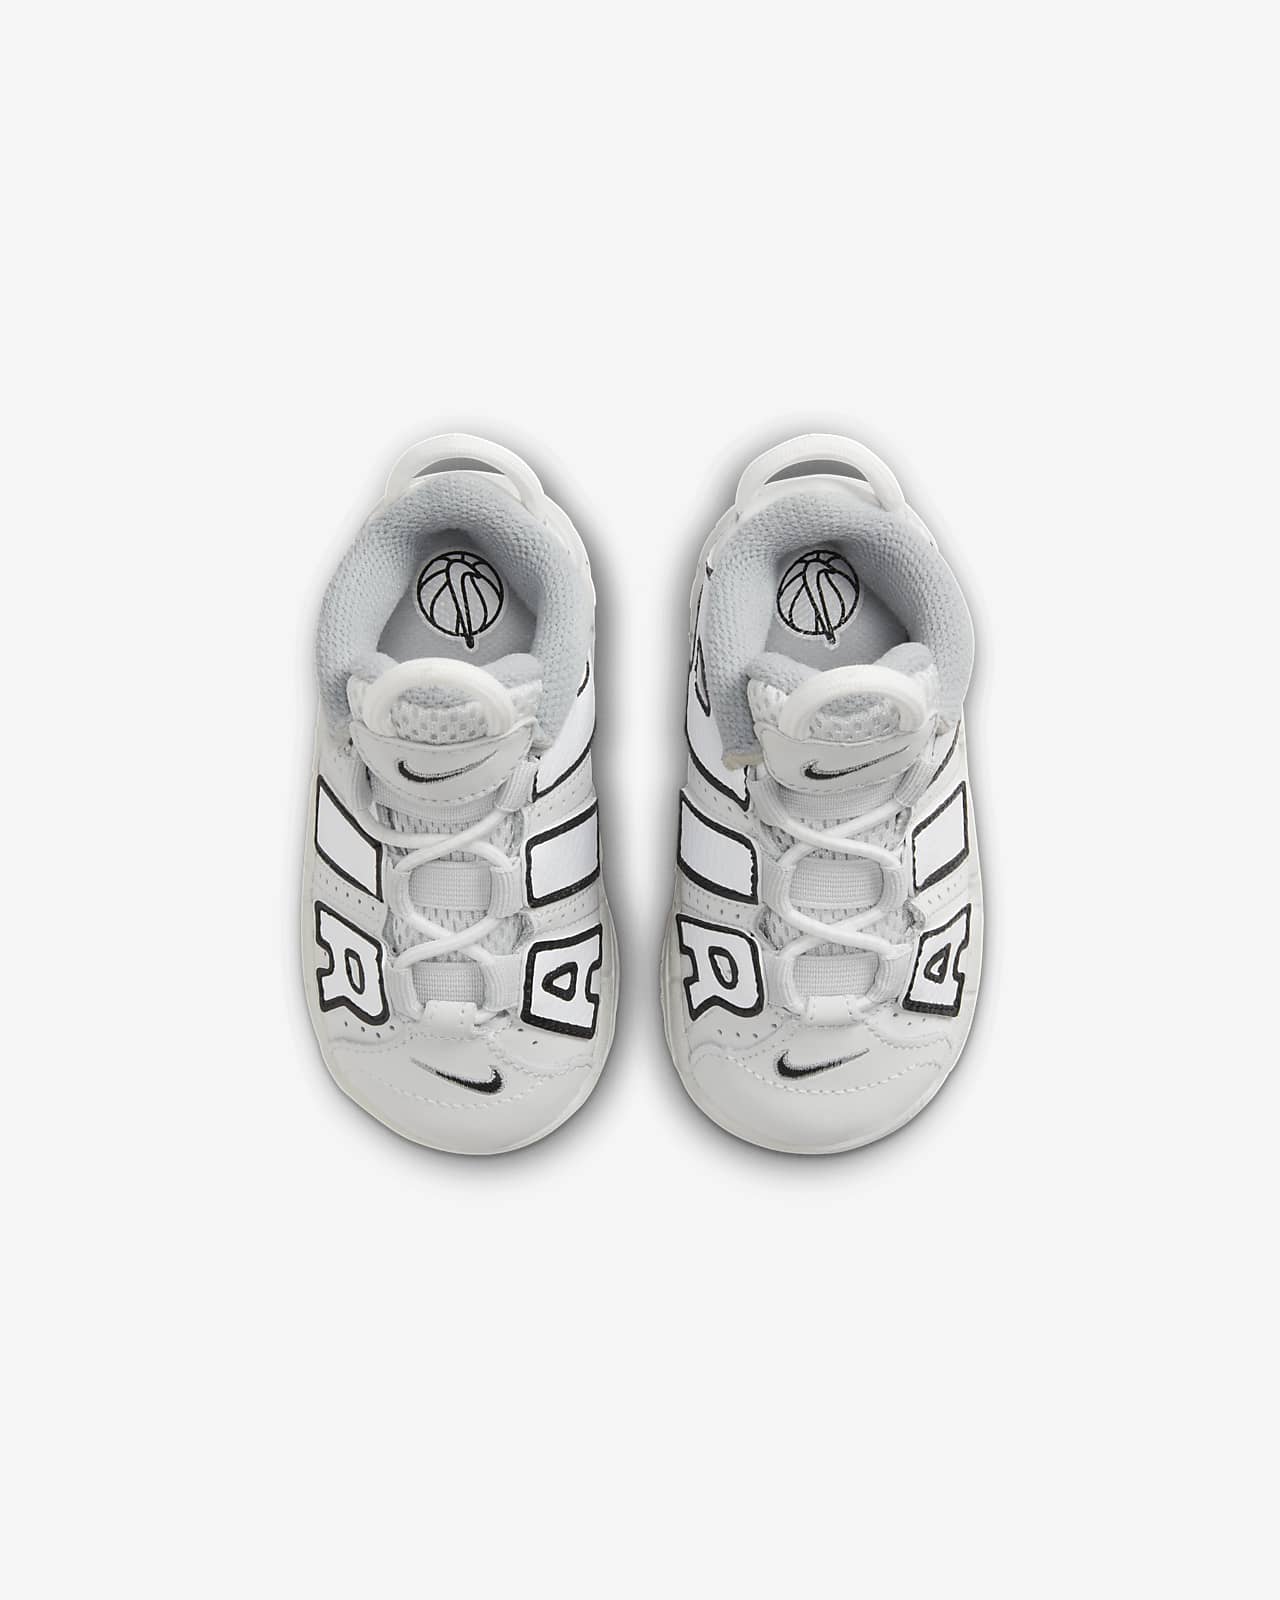 Nike Air More Uptempo 嬰幼兒鞋款